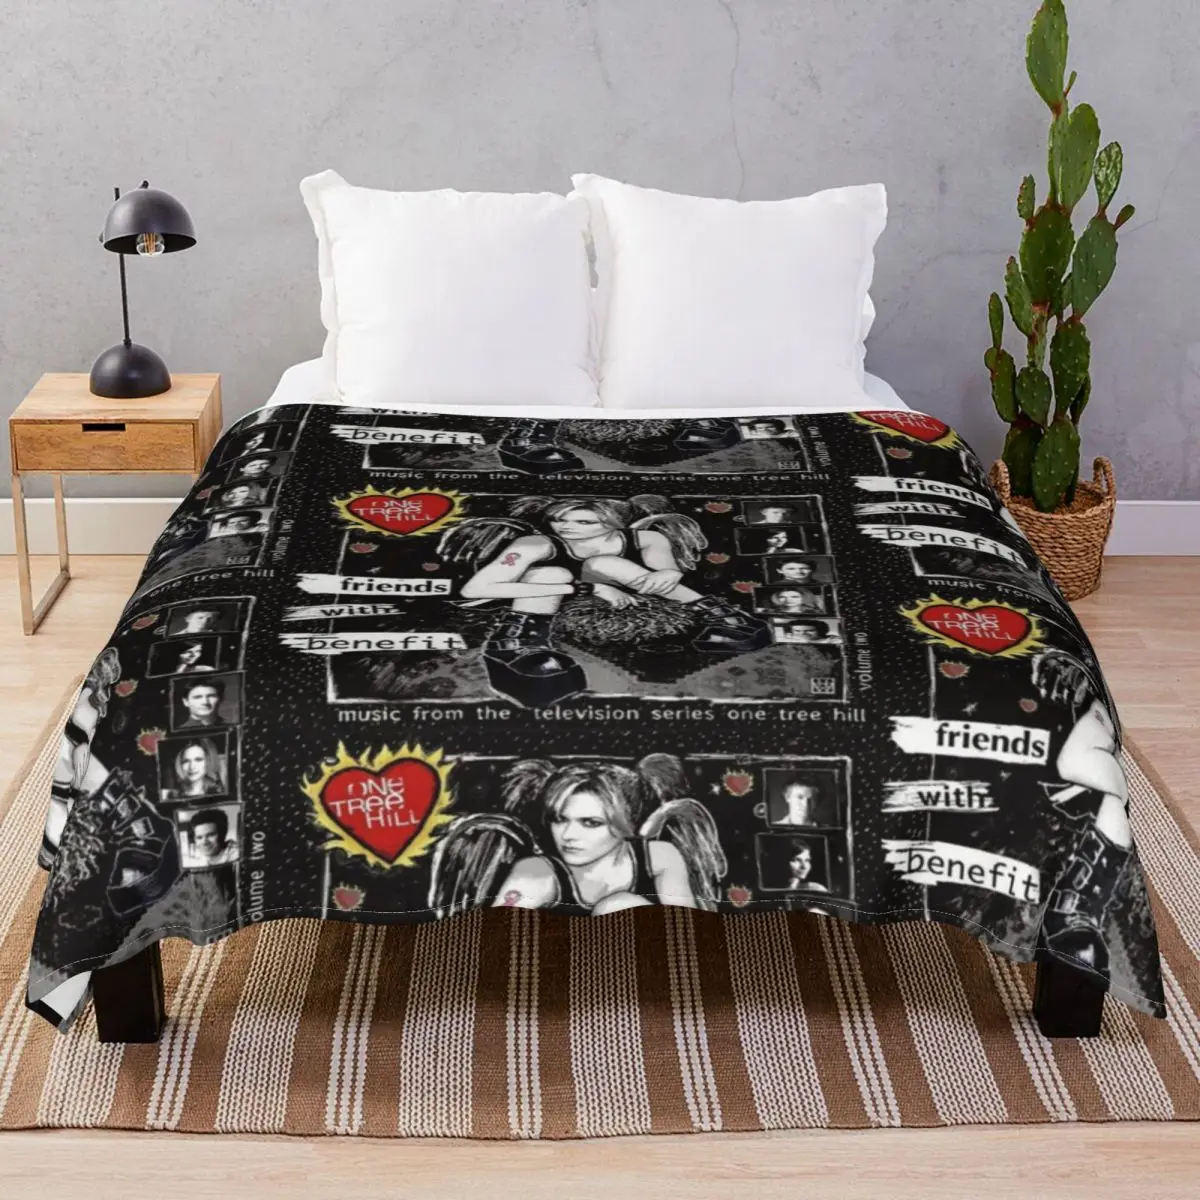 One Tree Hill Friends With Benefit Blankets Fleece Autumn Ultra-Soft Throw Blanket for Bedding Sofa Camp Office